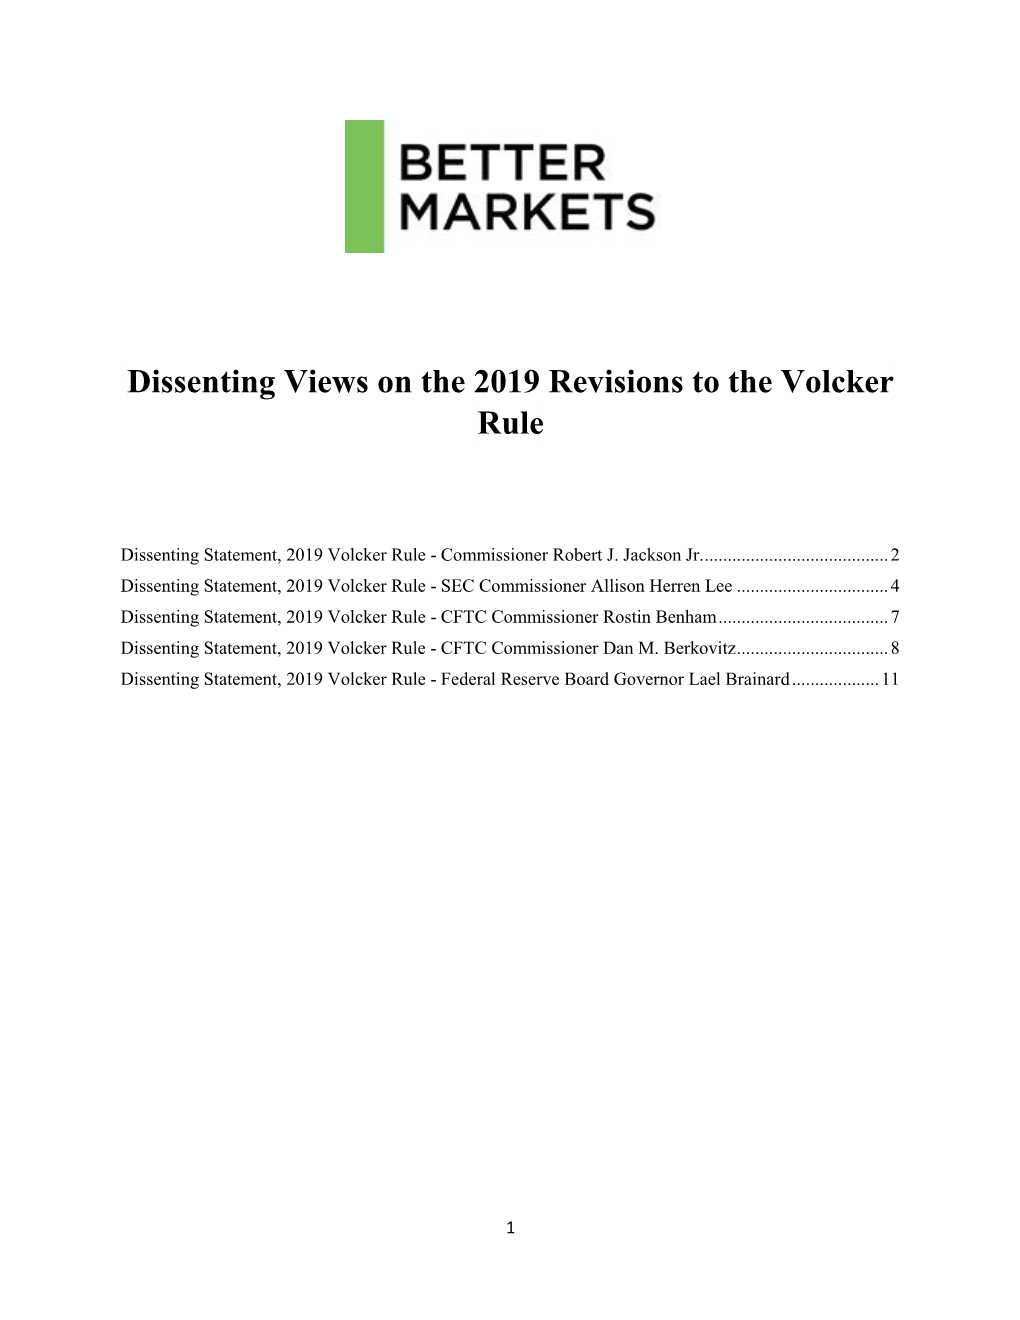 Dissenting Views on the 2019 Revisions to the Volcker Rule